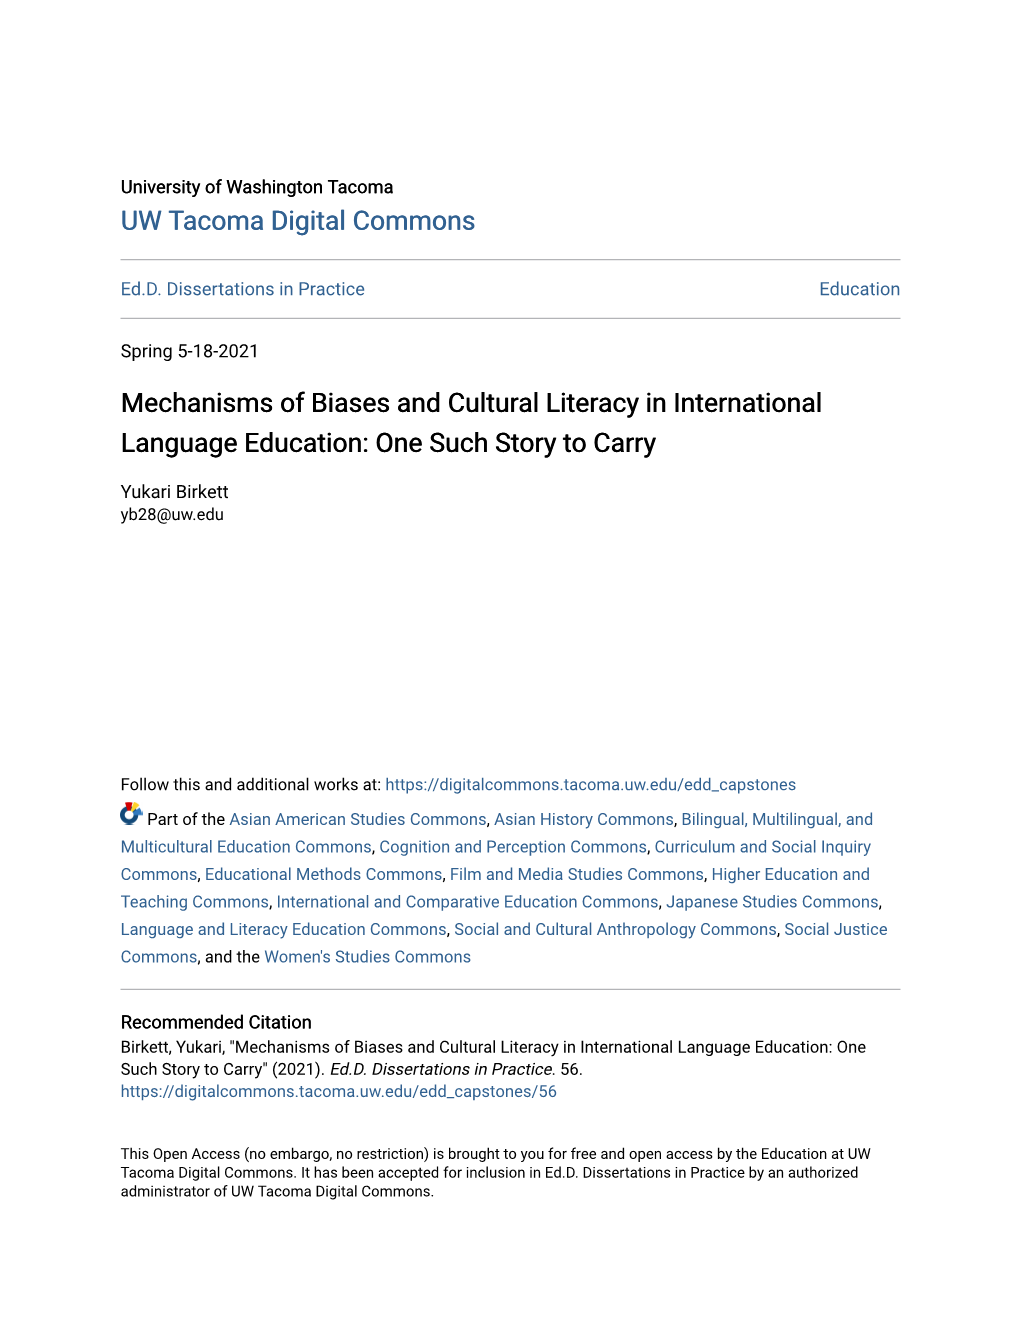 Mechanisms of Biases and Cultural Literacy in International Language Education: One Such Story to Carry